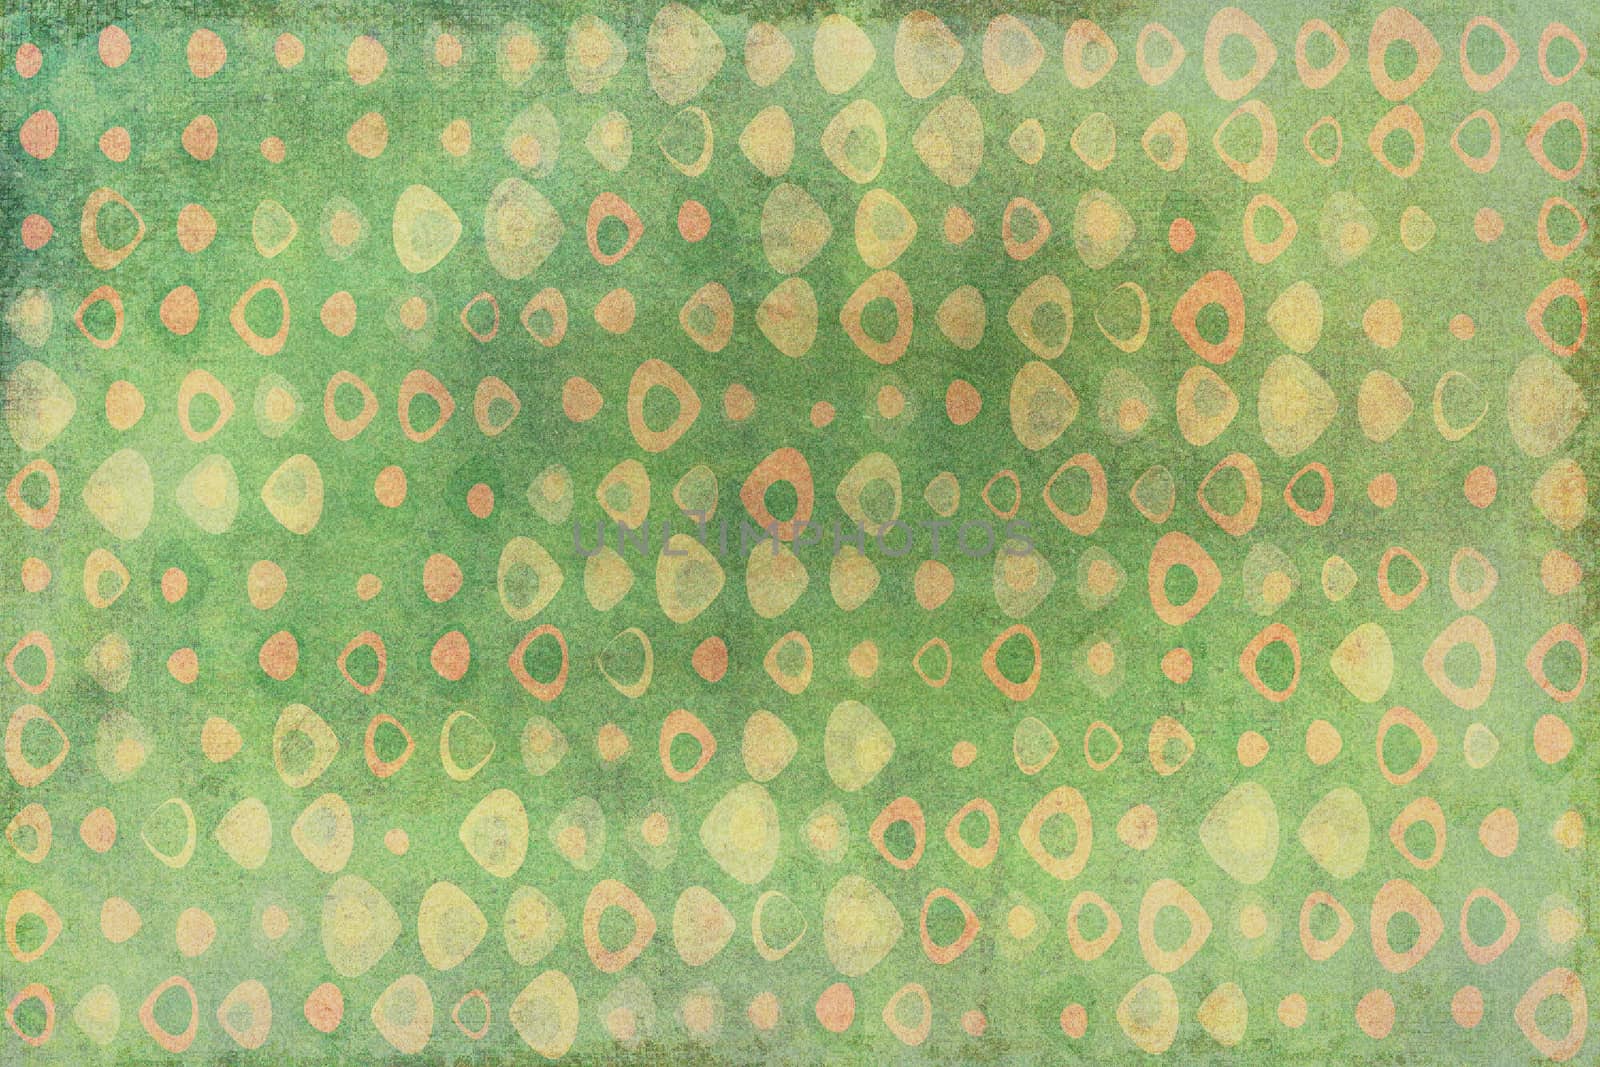 Texture background made of a green and orange dots, or triangles with round corners